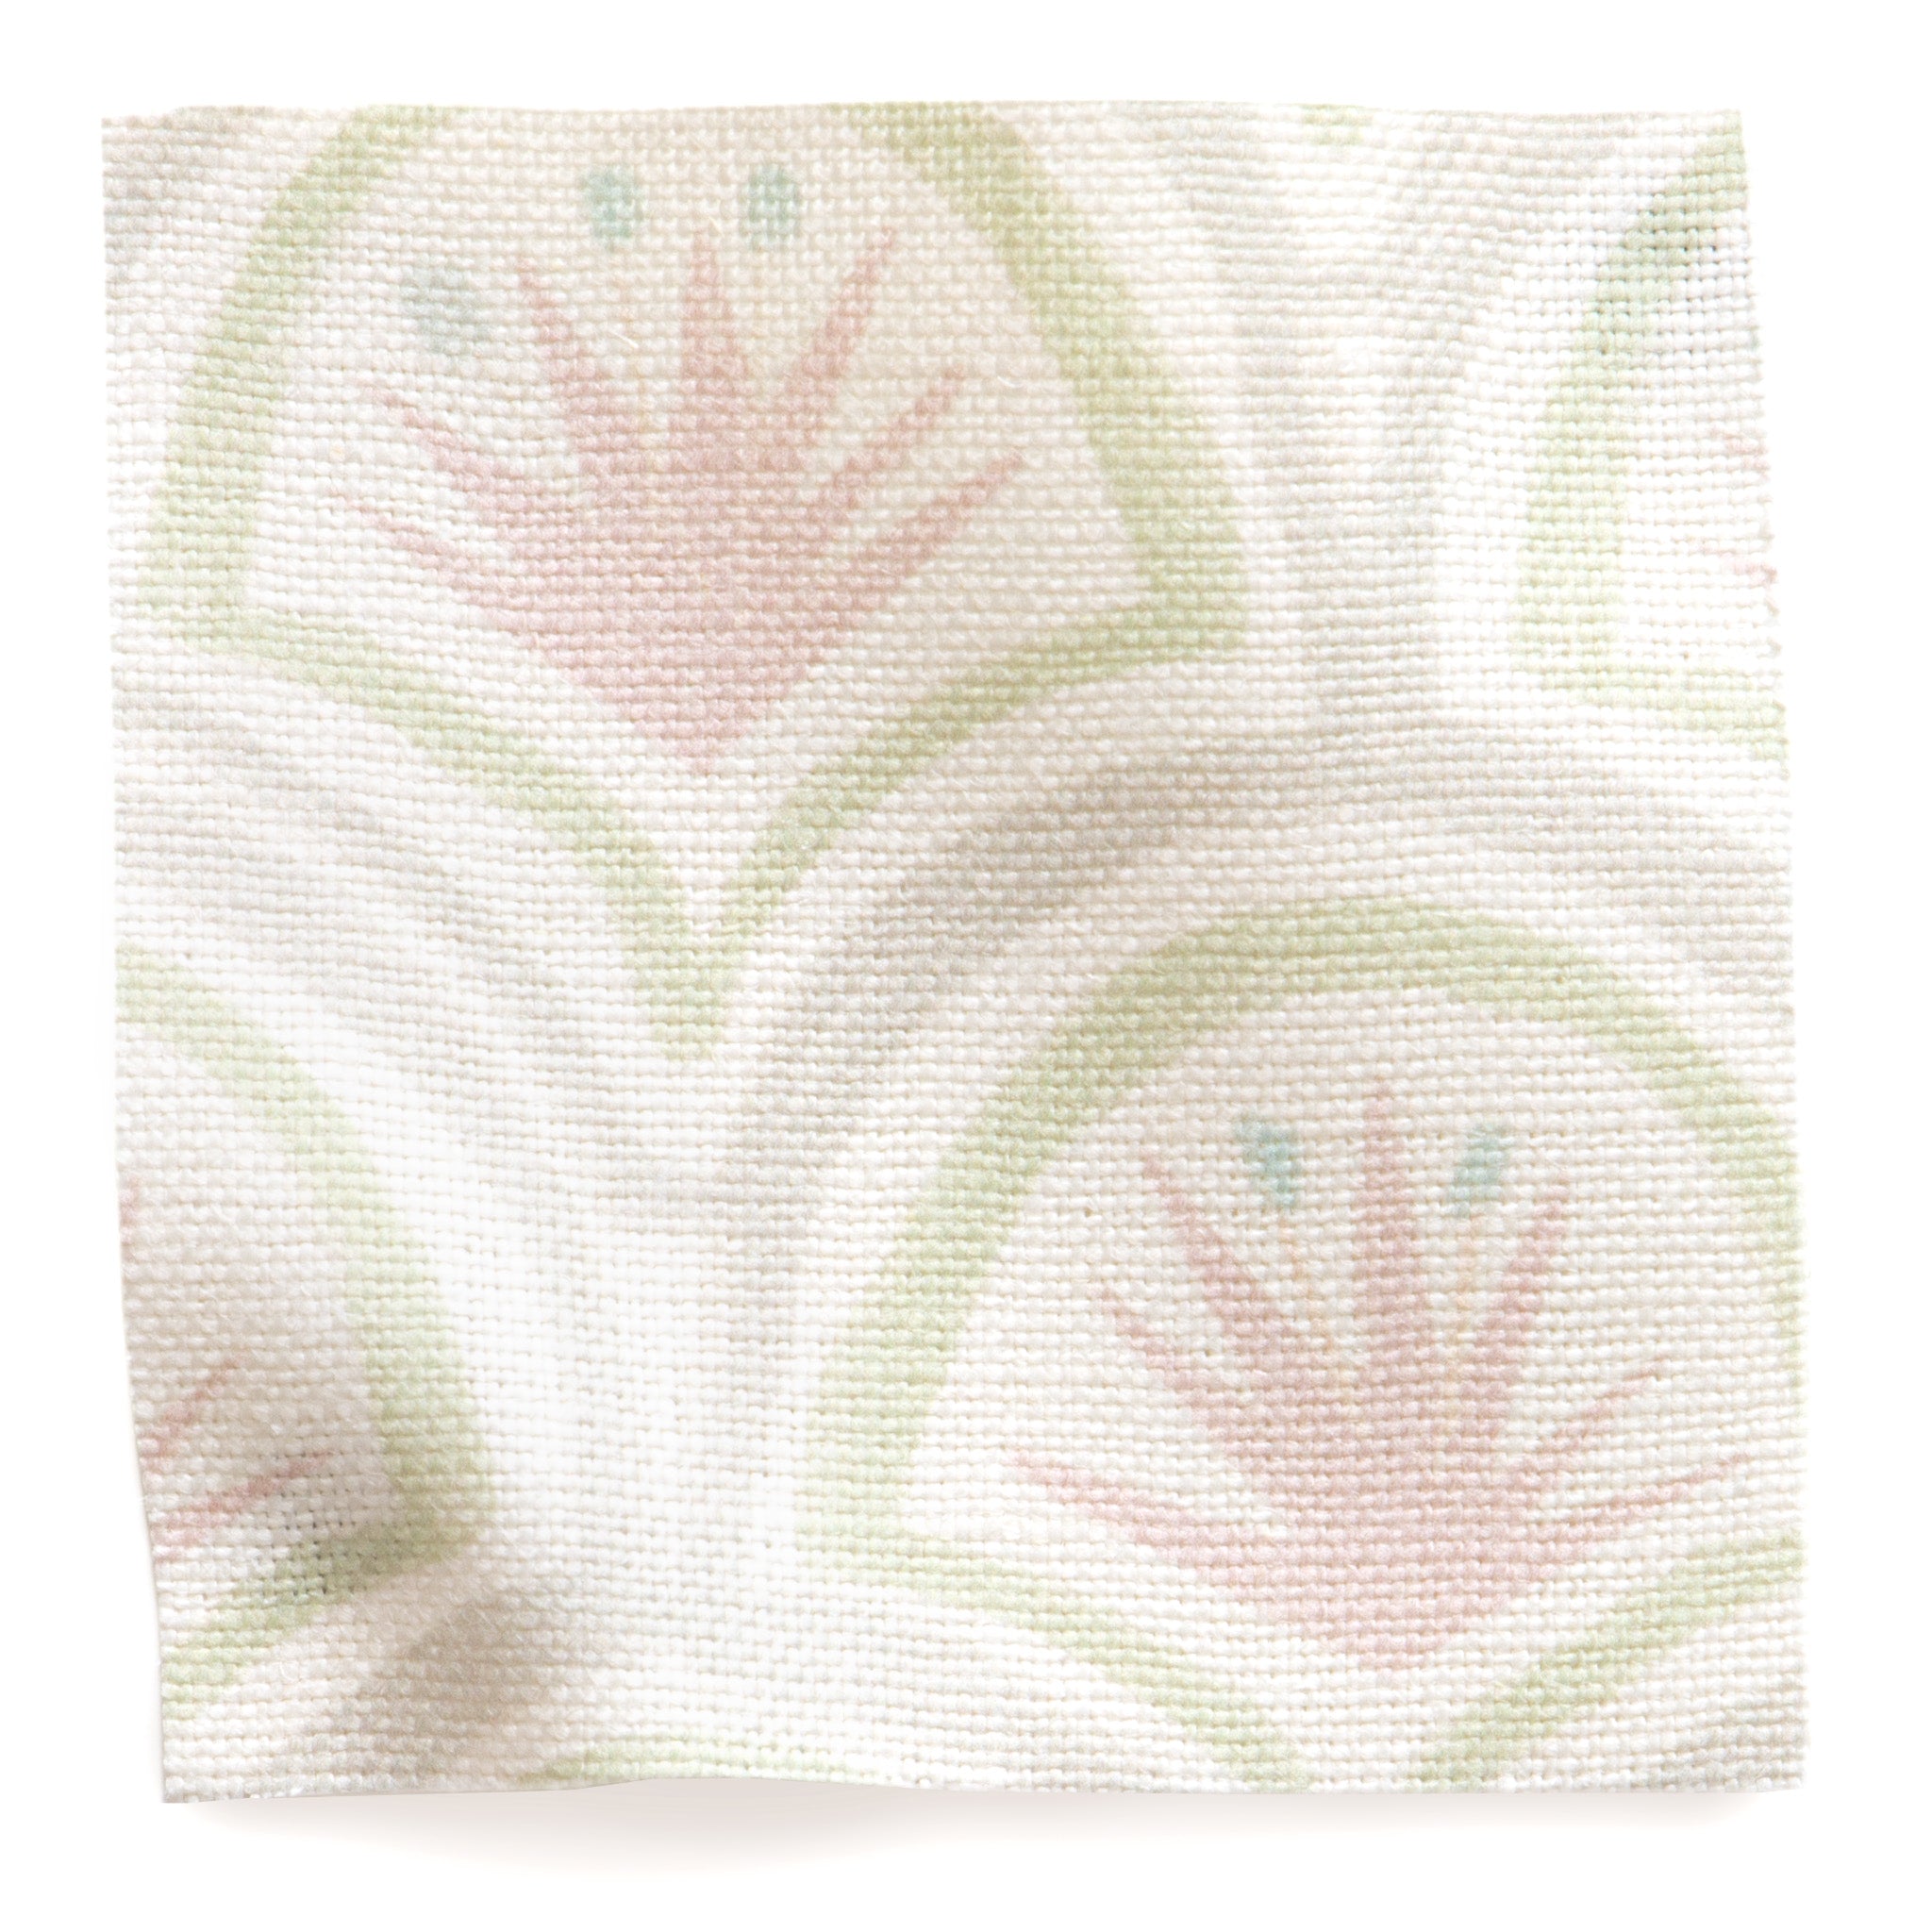 Euro Linen - Pink-Green Camouflage - Printed Linen Fabric